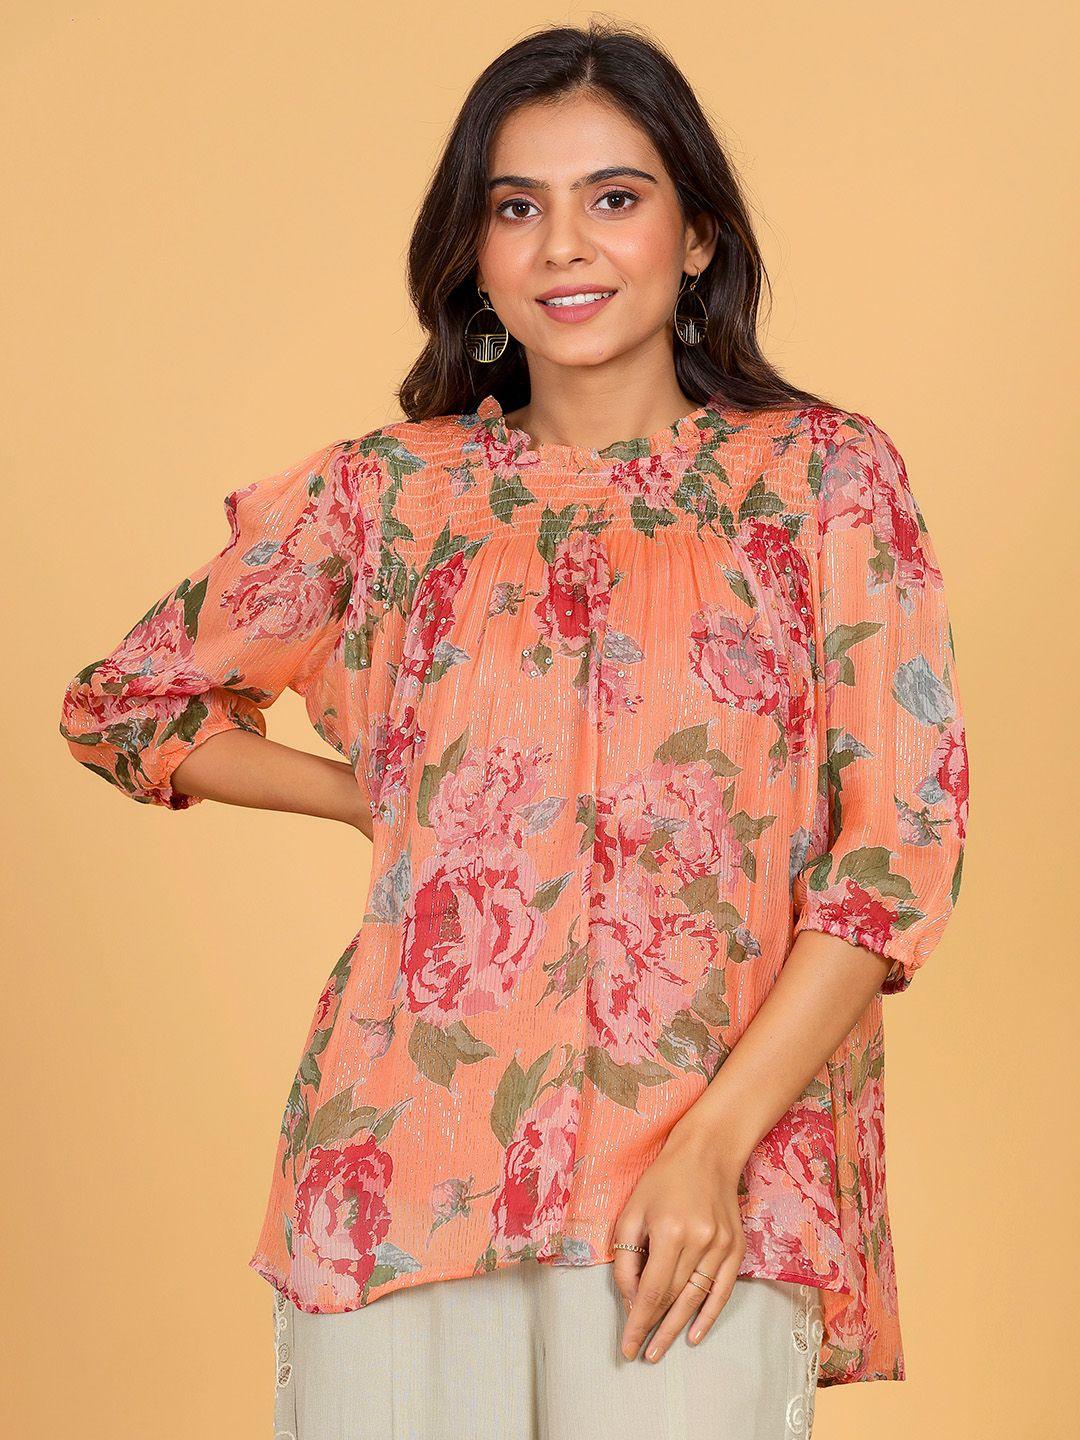 westified coral floral print chiffon top